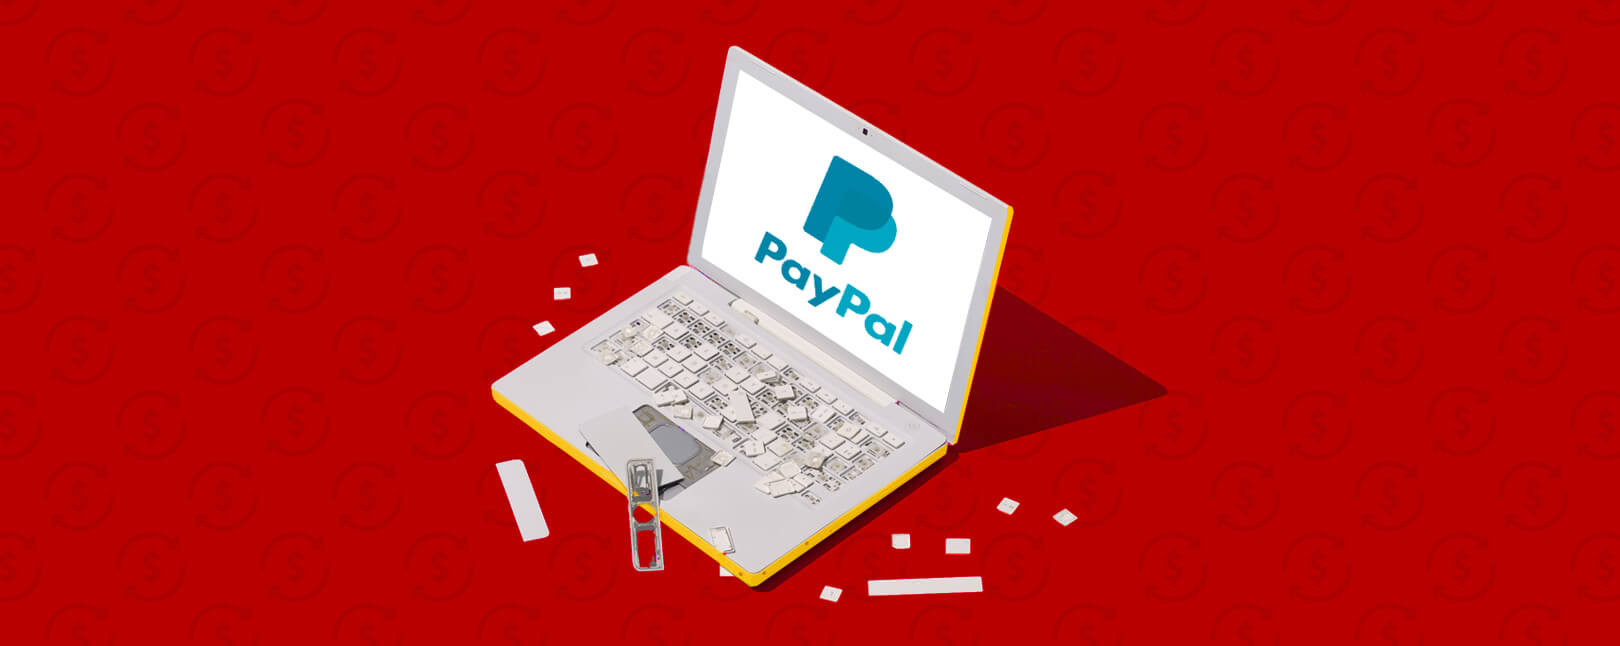 PayPal Resolution Center